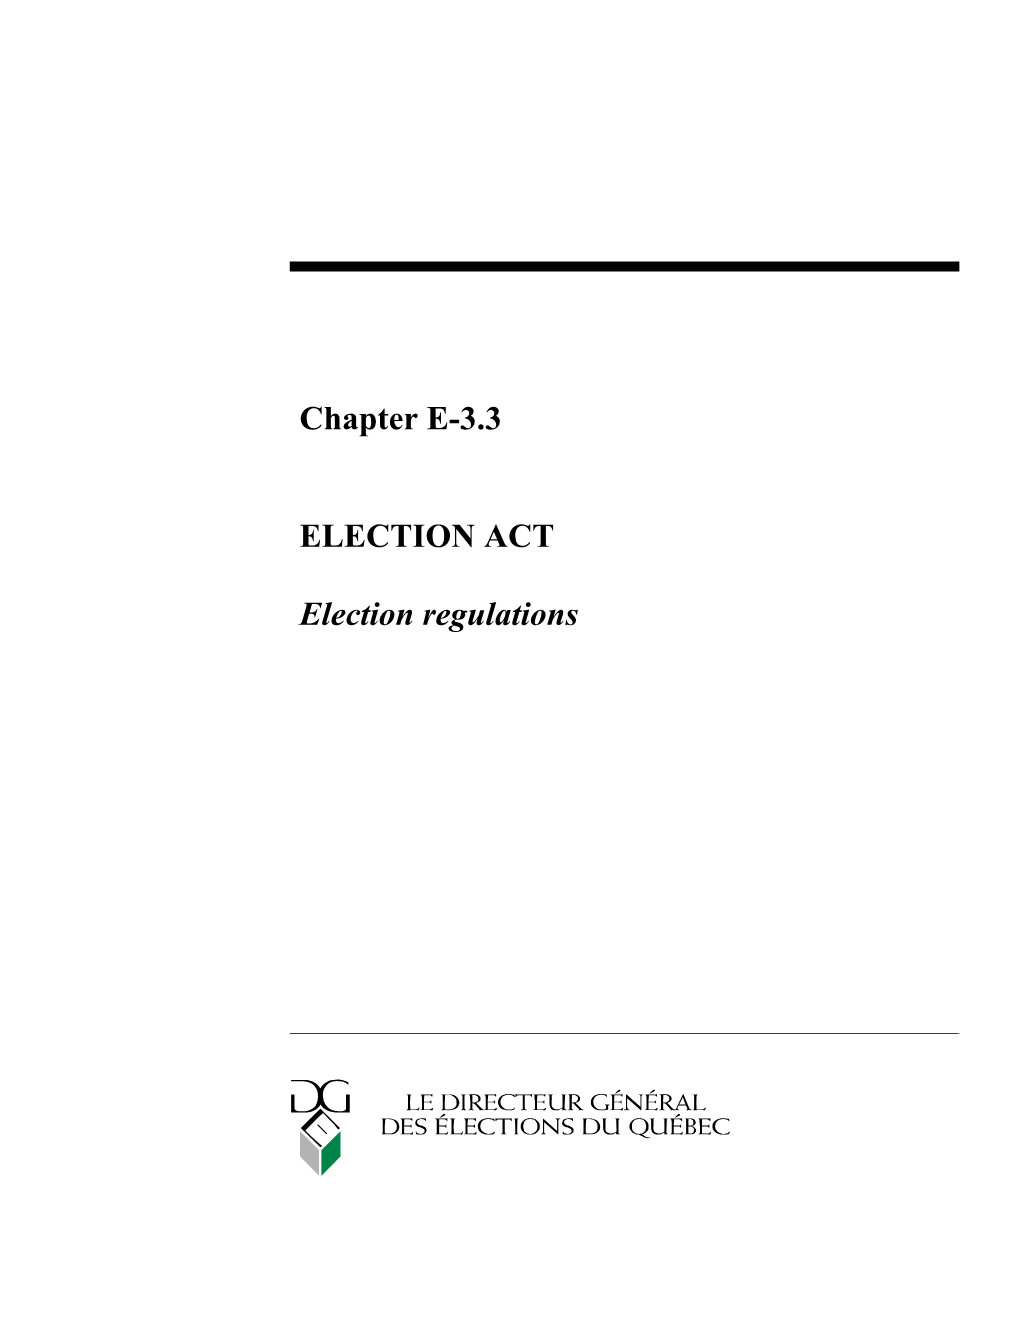 Chapter E-3.3 ELECTION ACT Election